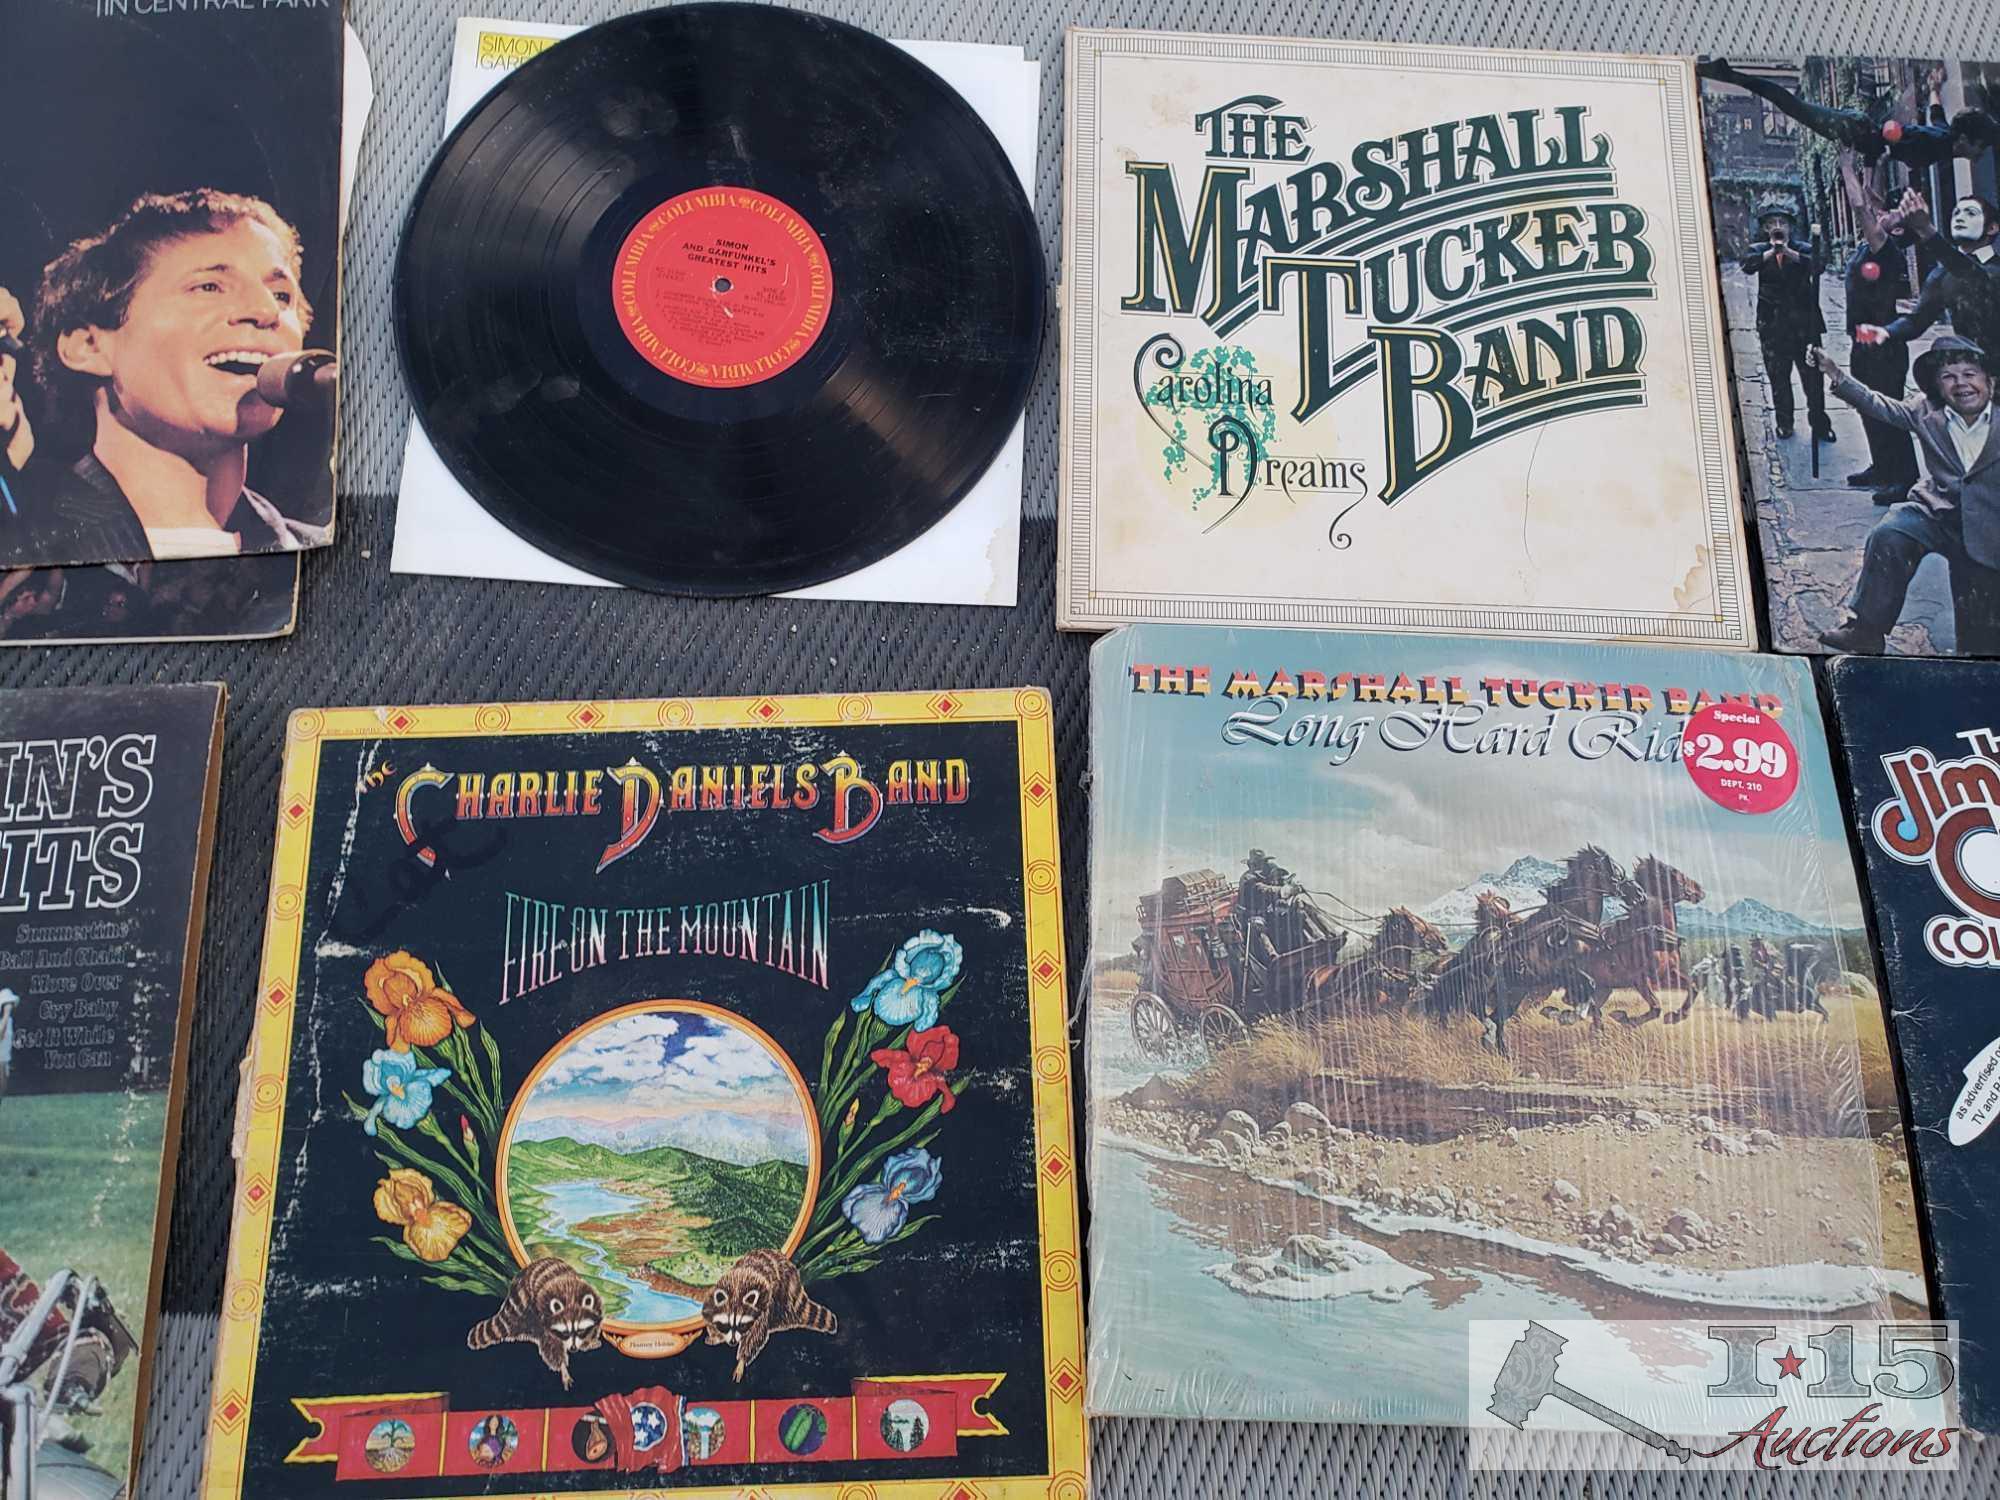 26 Vinyl Records/Albums, Pink Floyd, The Doors, George Carlin, and More